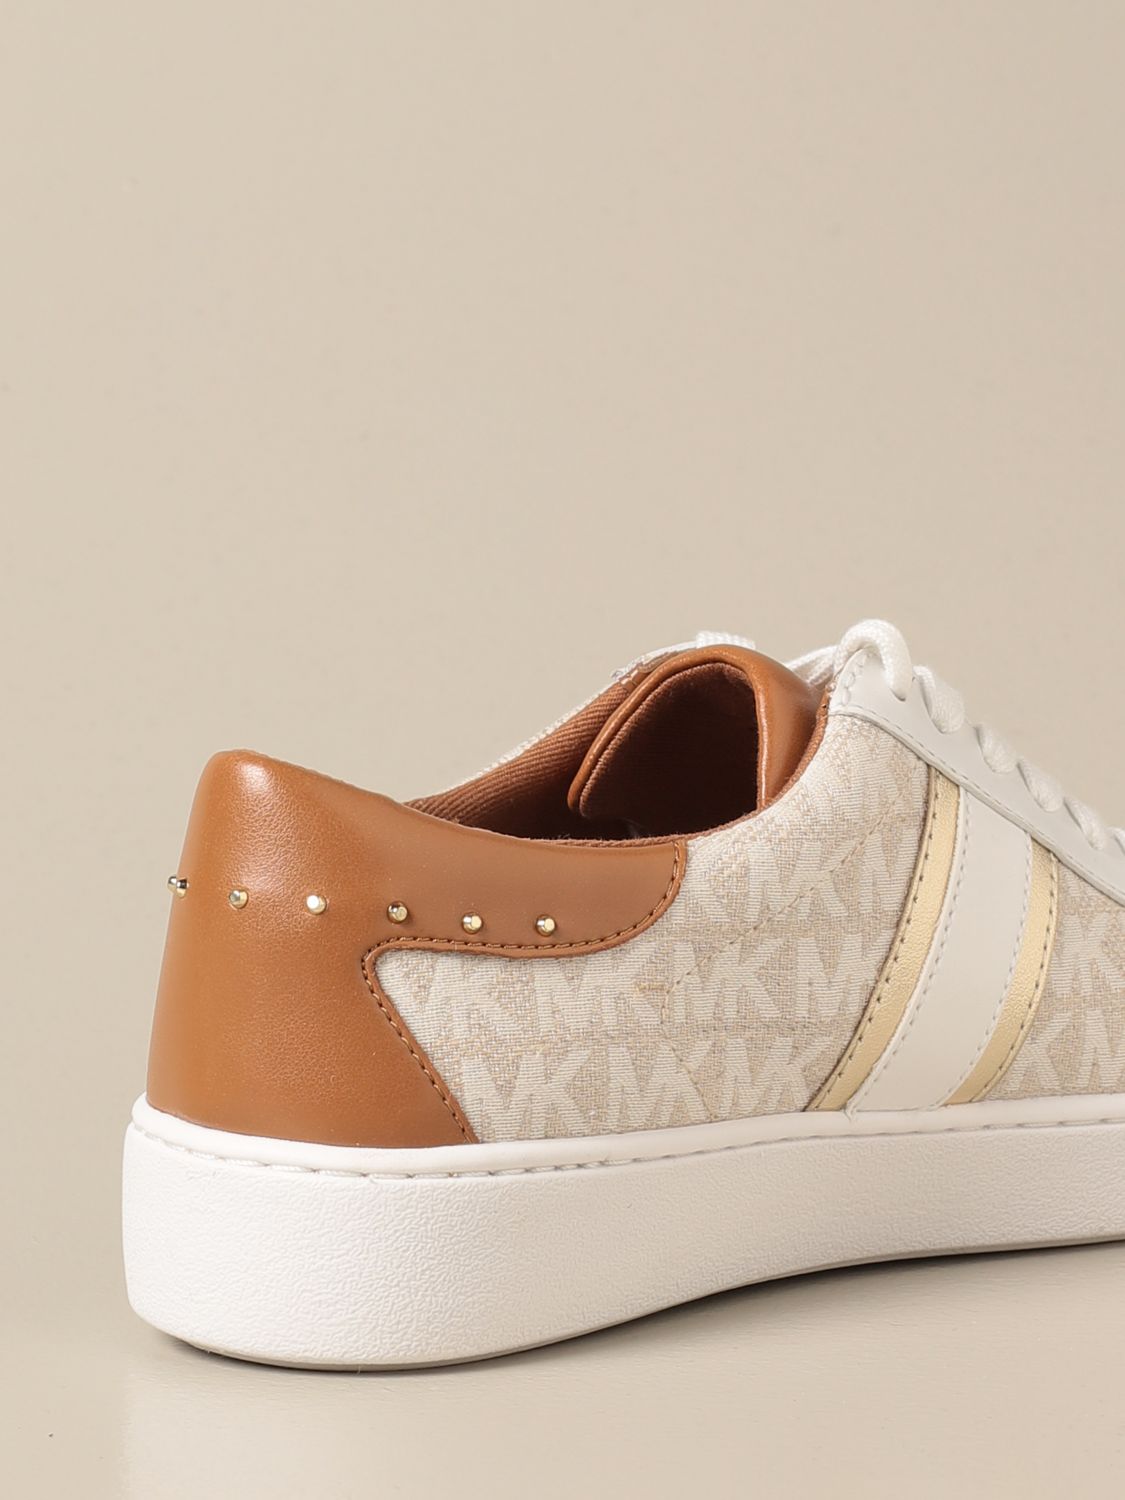 5 Best Michael Kors Wedge Sneakers and Trainers for Women  Michael kors  wedge sneakers Michael kors sneakers Michael kors shoes sneakers